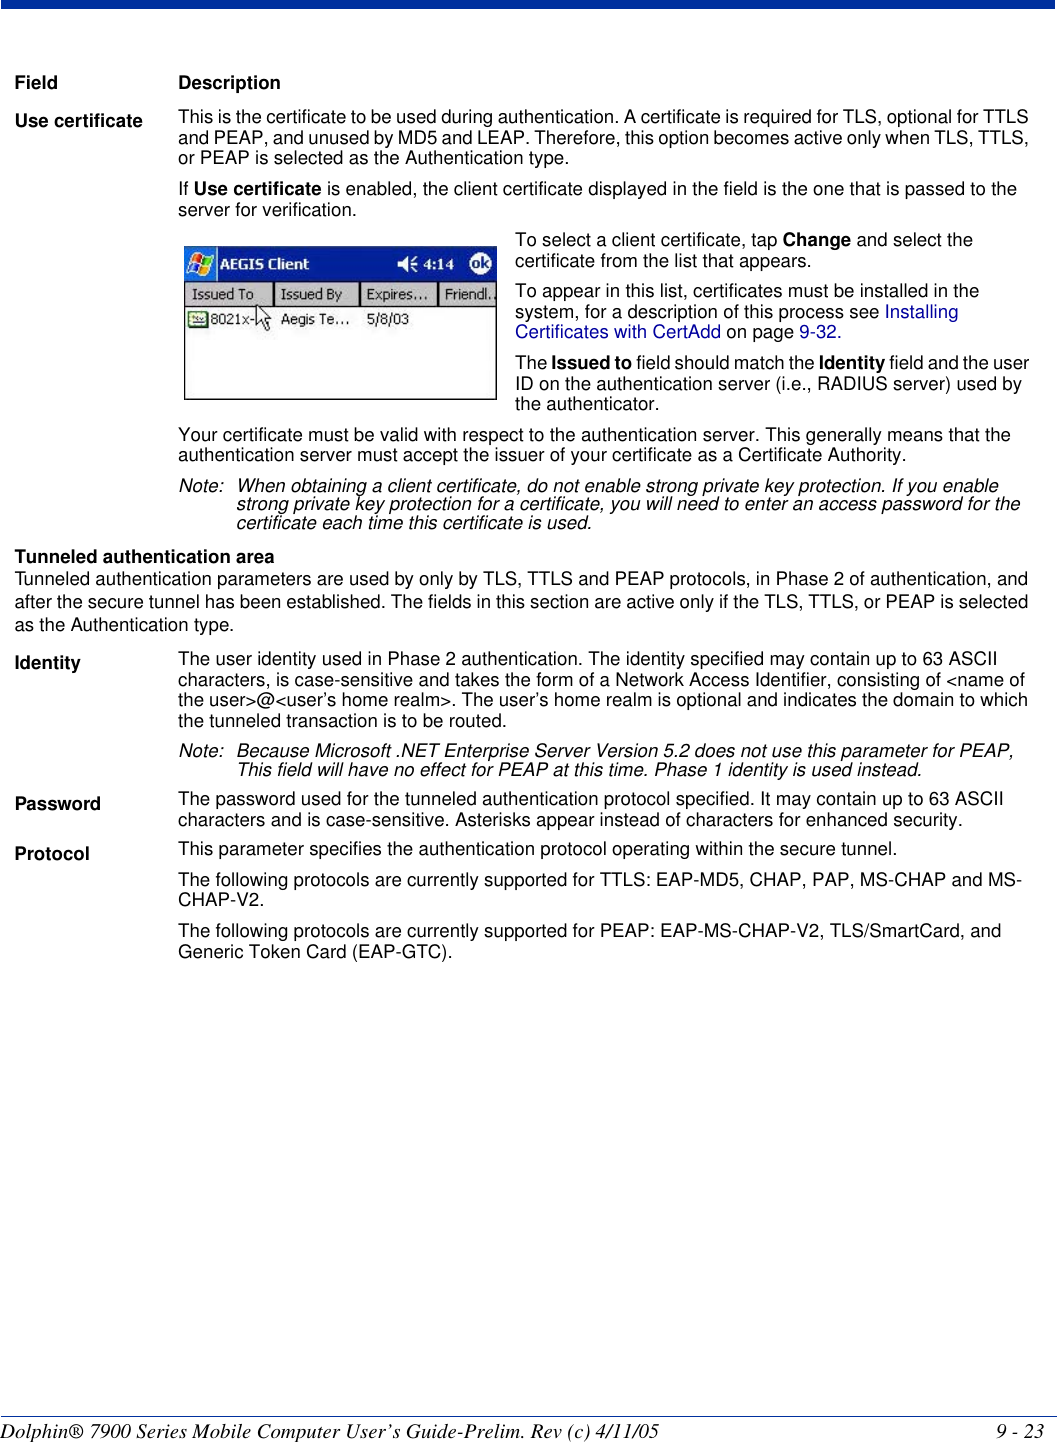 Dolphin® 7900 Series Mobile Computer User’s Guide-Prelim. Rev (c) 4/11/05 9 - 23Use certificate This is the certificate to be used during authentication. A certificate is required for TLS, optional for TTLS and PEAP, and unused by MD5 and LEAP. Therefore, this option becomes active only when TLS, TTLS, or PEAP is selected as the Authentication type.If Use certificate is enabled, the client certificate displayed in the field is the one that is passed to the server for verification.   To select a client certificate, tap Change and select the certificate from the list that appears. To appear in this list, certificates must be installed in the system, for a description of this process see Installing Certificates with CertAdd on page 9-32. The Issued to field should match the Identity field and the user ID on the authentication server (i.e., RADIUS server) used by the authenticator. Your certificate must be valid with respect to the authentication server. This generally means that the authentication server must accept the issuer of your certificate as a Certificate Authority. Note: When obtaining a client certificate, do not enable strong private key protection. If you enable strong private key protection for a certificate, you will need to enter an access password for the certificate each time this certificate is used. Tunneled authentication area Tunneled authentication parameters are used by only by TLS, TTLS and PEAP protocols, in Phase 2 of authentication, and after the secure tunnel has been established. The fields in this section are active only if the TLS, TTLS, or PEAP is selected as the Authentication type. Identity The user identity used in Phase 2 authentication. The identity specified may contain up to 63 ASCII characters, is case-sensitive and takes the form of a Network Access Identifier, consisting of &lt;name of the user&gt;@&lt;user’s home realm&gt;. The user’s home realm is optional and indicates the domain to which the tunneled transaction is to be routed.Note: Because Microsoft .NET Enterprise Server Version 5.2 does not use this parameter for PEAP, This field will have no effect for PEAP at this time. Phase 1 identity is used instead.Password The password used for the tunneled authentication protocol specified. It may contain up to 63 ASCII characters and is case-sensitive. Asterisks appear instead of characters for enhanced security.Protocol This parameter specifies the authentication protocol operating within the secure tunnel. The following protocols are currently supported for TTLS: EAP-MD5, CHAP, PAP, MS-CHAP and MS-CHAP-V2. The following protocols are currently supported for PEAP: EAP-MS-CHAP-V2, TLS/SmartCard, and Generic Token Card (EAP-GTC).Field Description